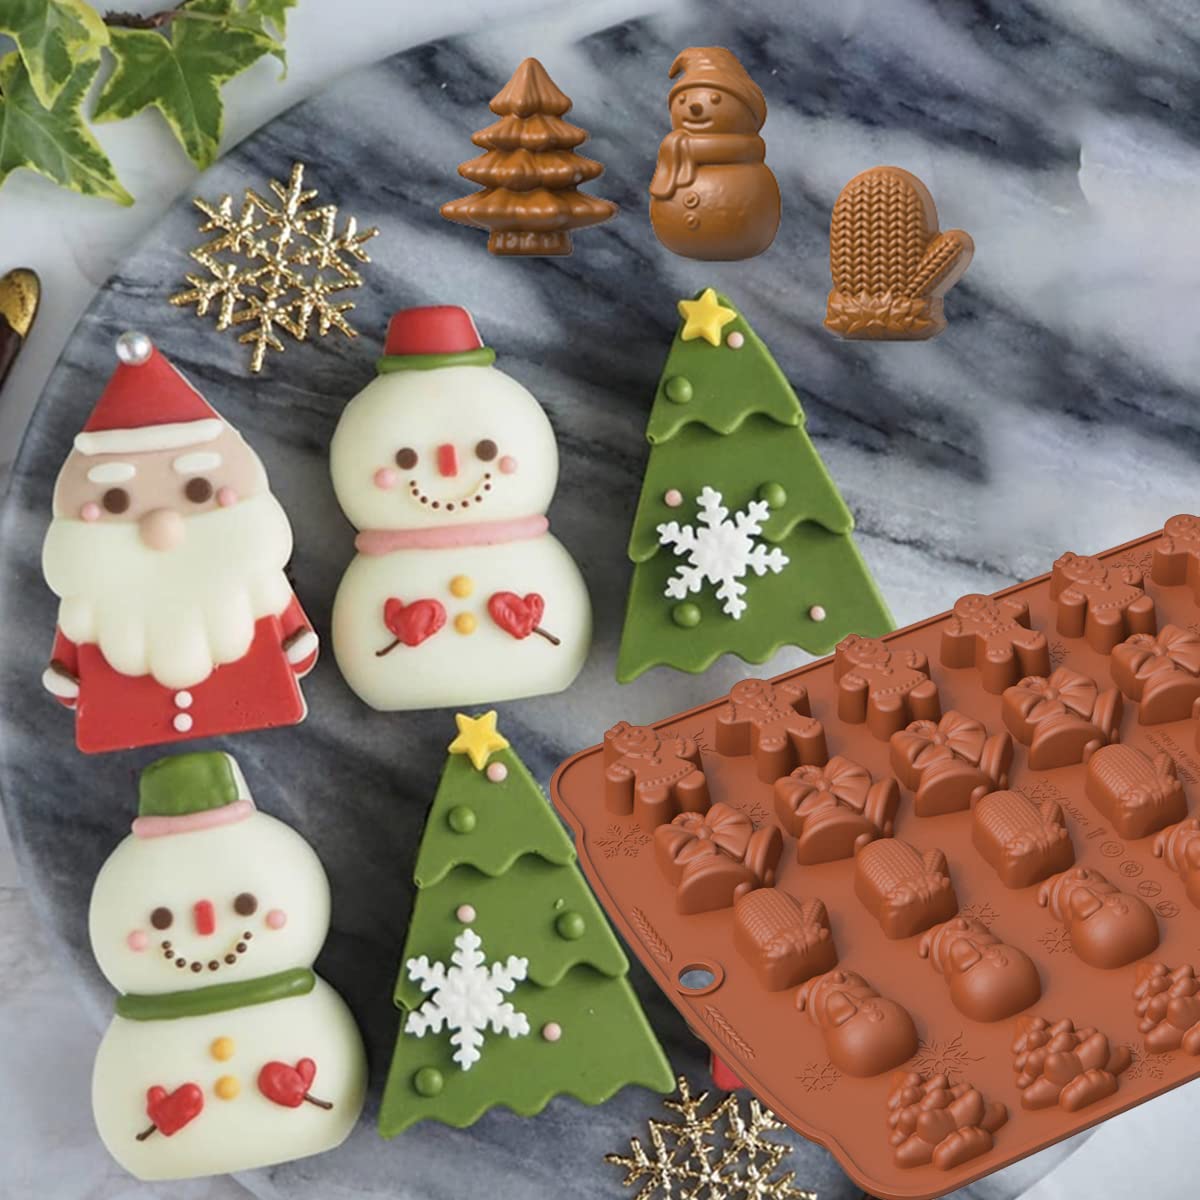 Christmas Candy Silicone 3D Mould,gingerbread man, bells, gloves, snowman, christmas tree 30 Cavity candy mold, for Christmas Party, Ice Cubes, Chocolate, Jelly, Candy.(2-pack of molds + 1 droppers)